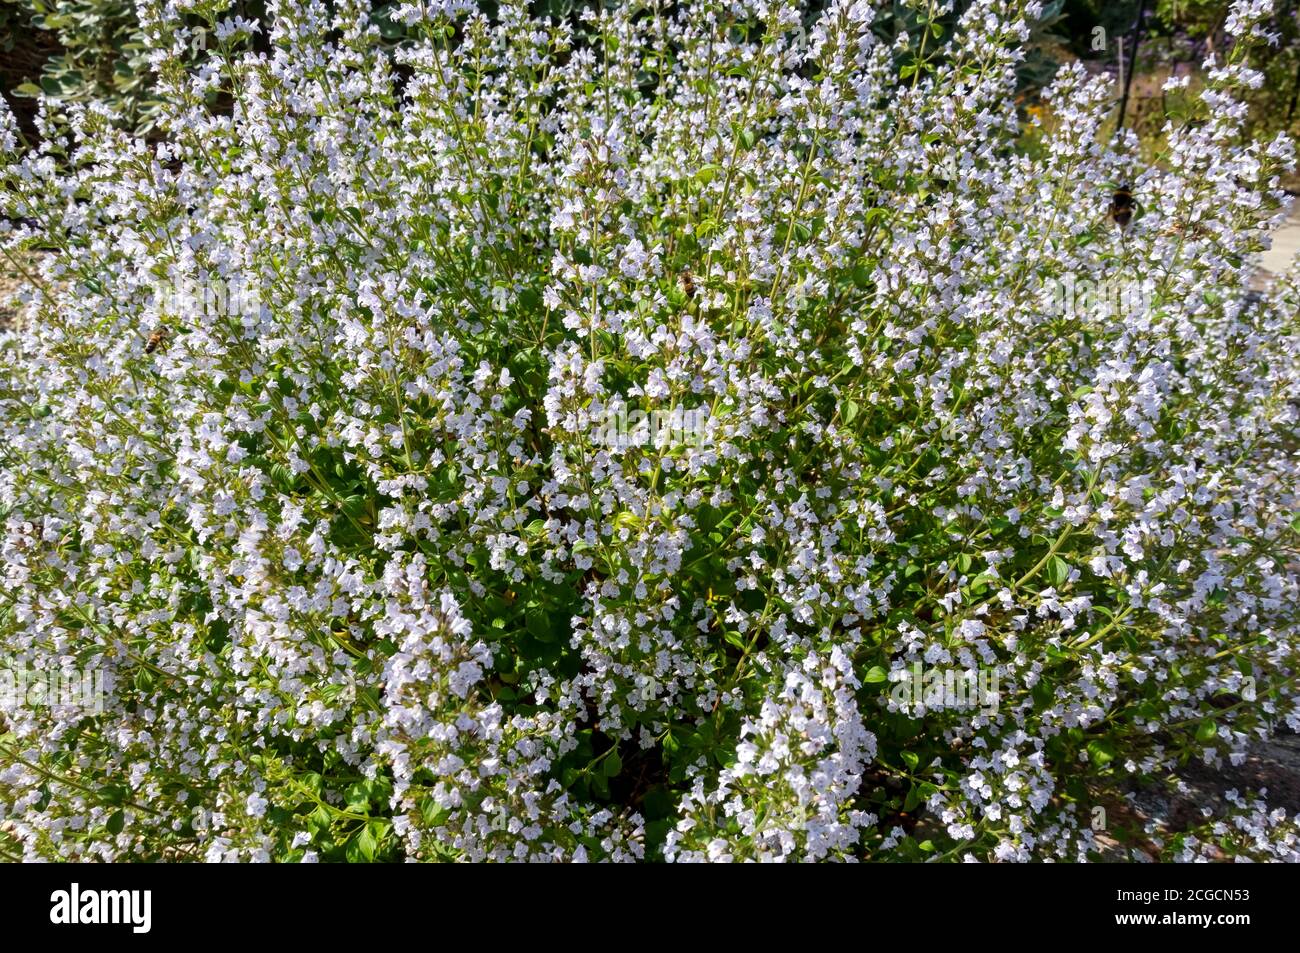 Close up of winter savoury (Satureja montana) herb plant flowers growing in a border in summer garden England UK United Kingdom GB Great Britain Stock Photo